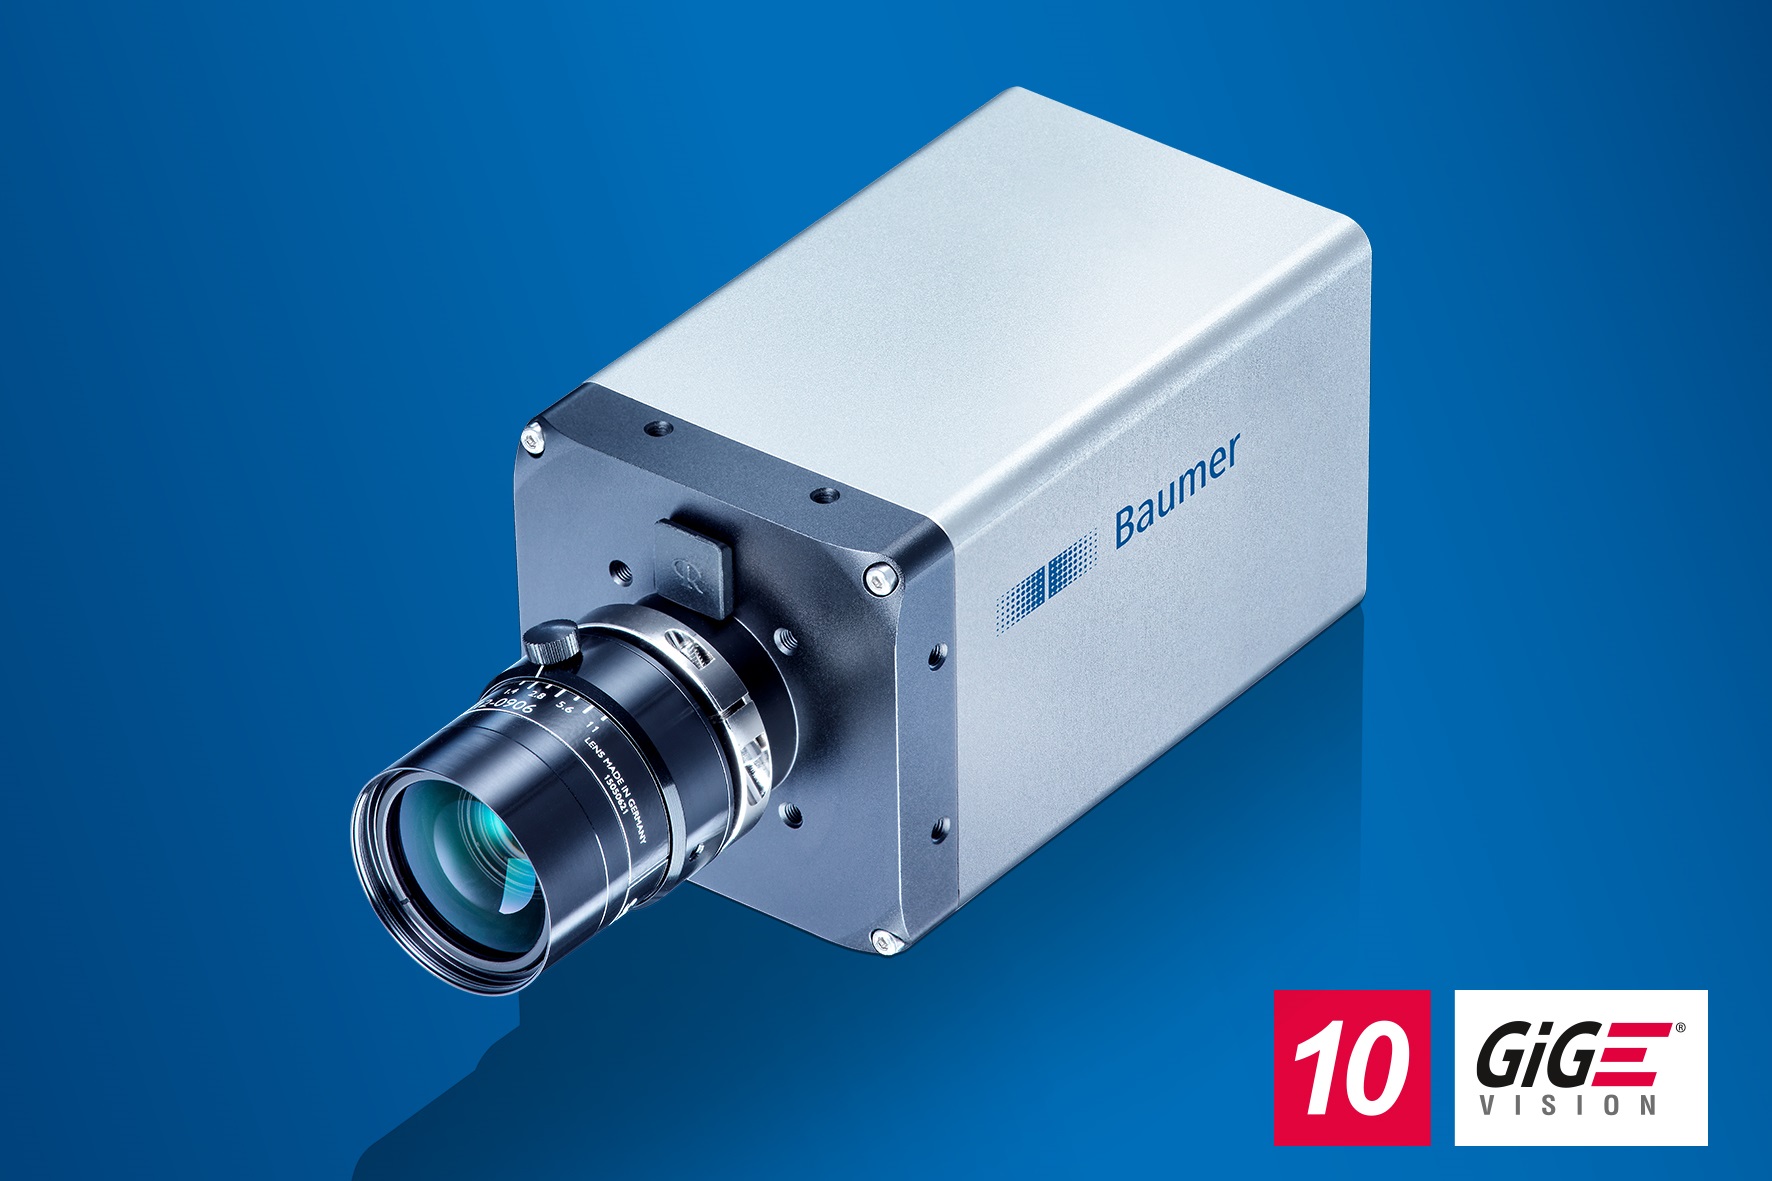 Baumer presents eight new models of the LX series which thanks to latest Sony Pregius sensors and 10 GigE interface offer supreme image quality at high speed together with easy system integration.